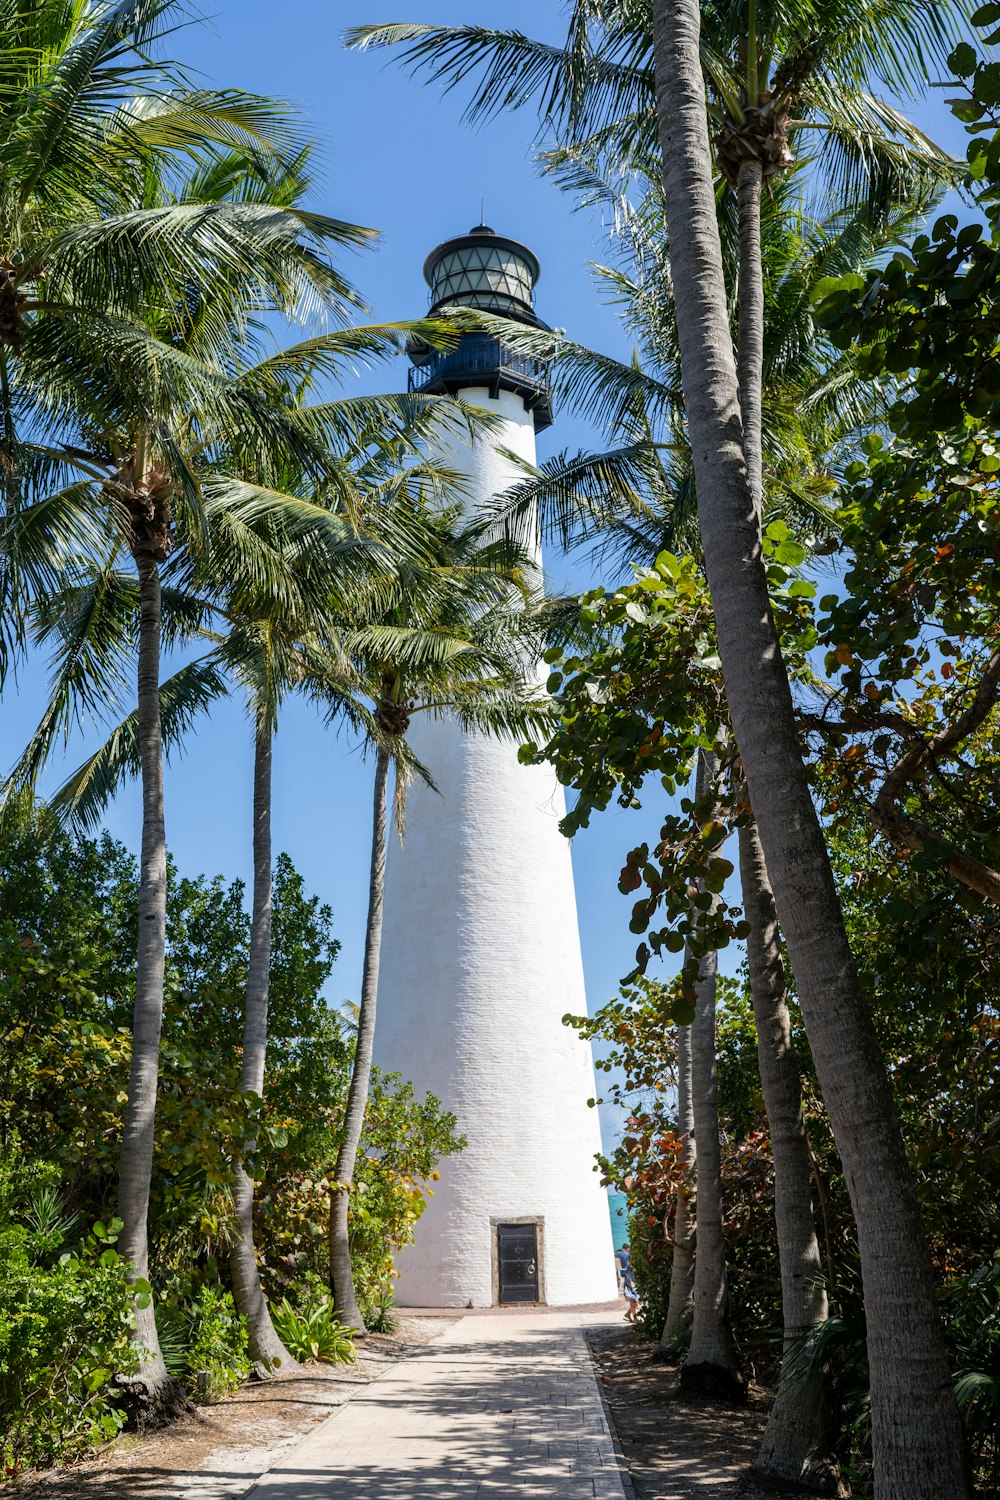 a white light house surrounded by palm trees